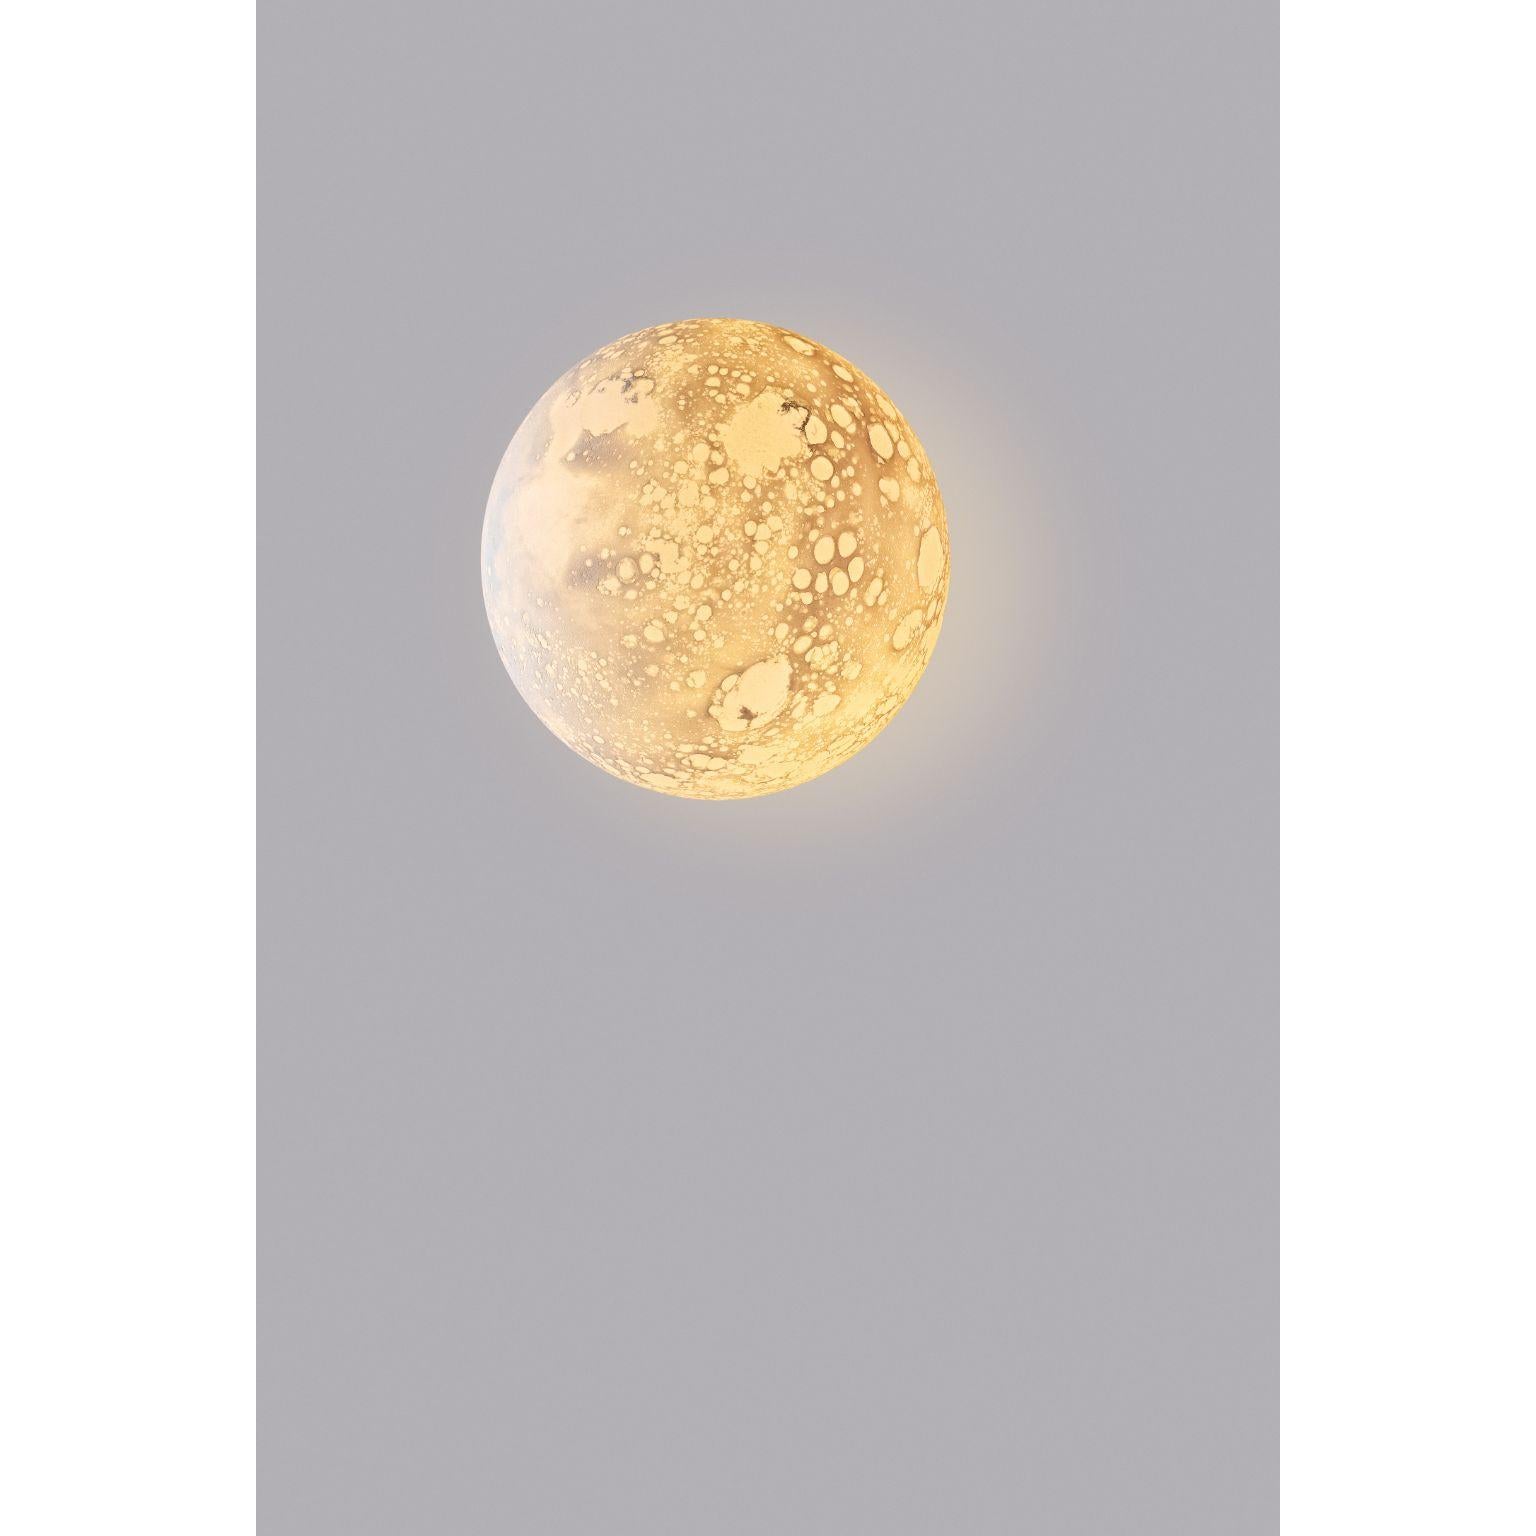 Moon sconce by Ludovic Clément d’Armont
Materials: Blown Glass, sculpted by Ludovic Clément d'Armont
Dimensions: 25x25x25 cm

All our lamps can be wired according to each country. If sold to the USA it will be wired for the USA for